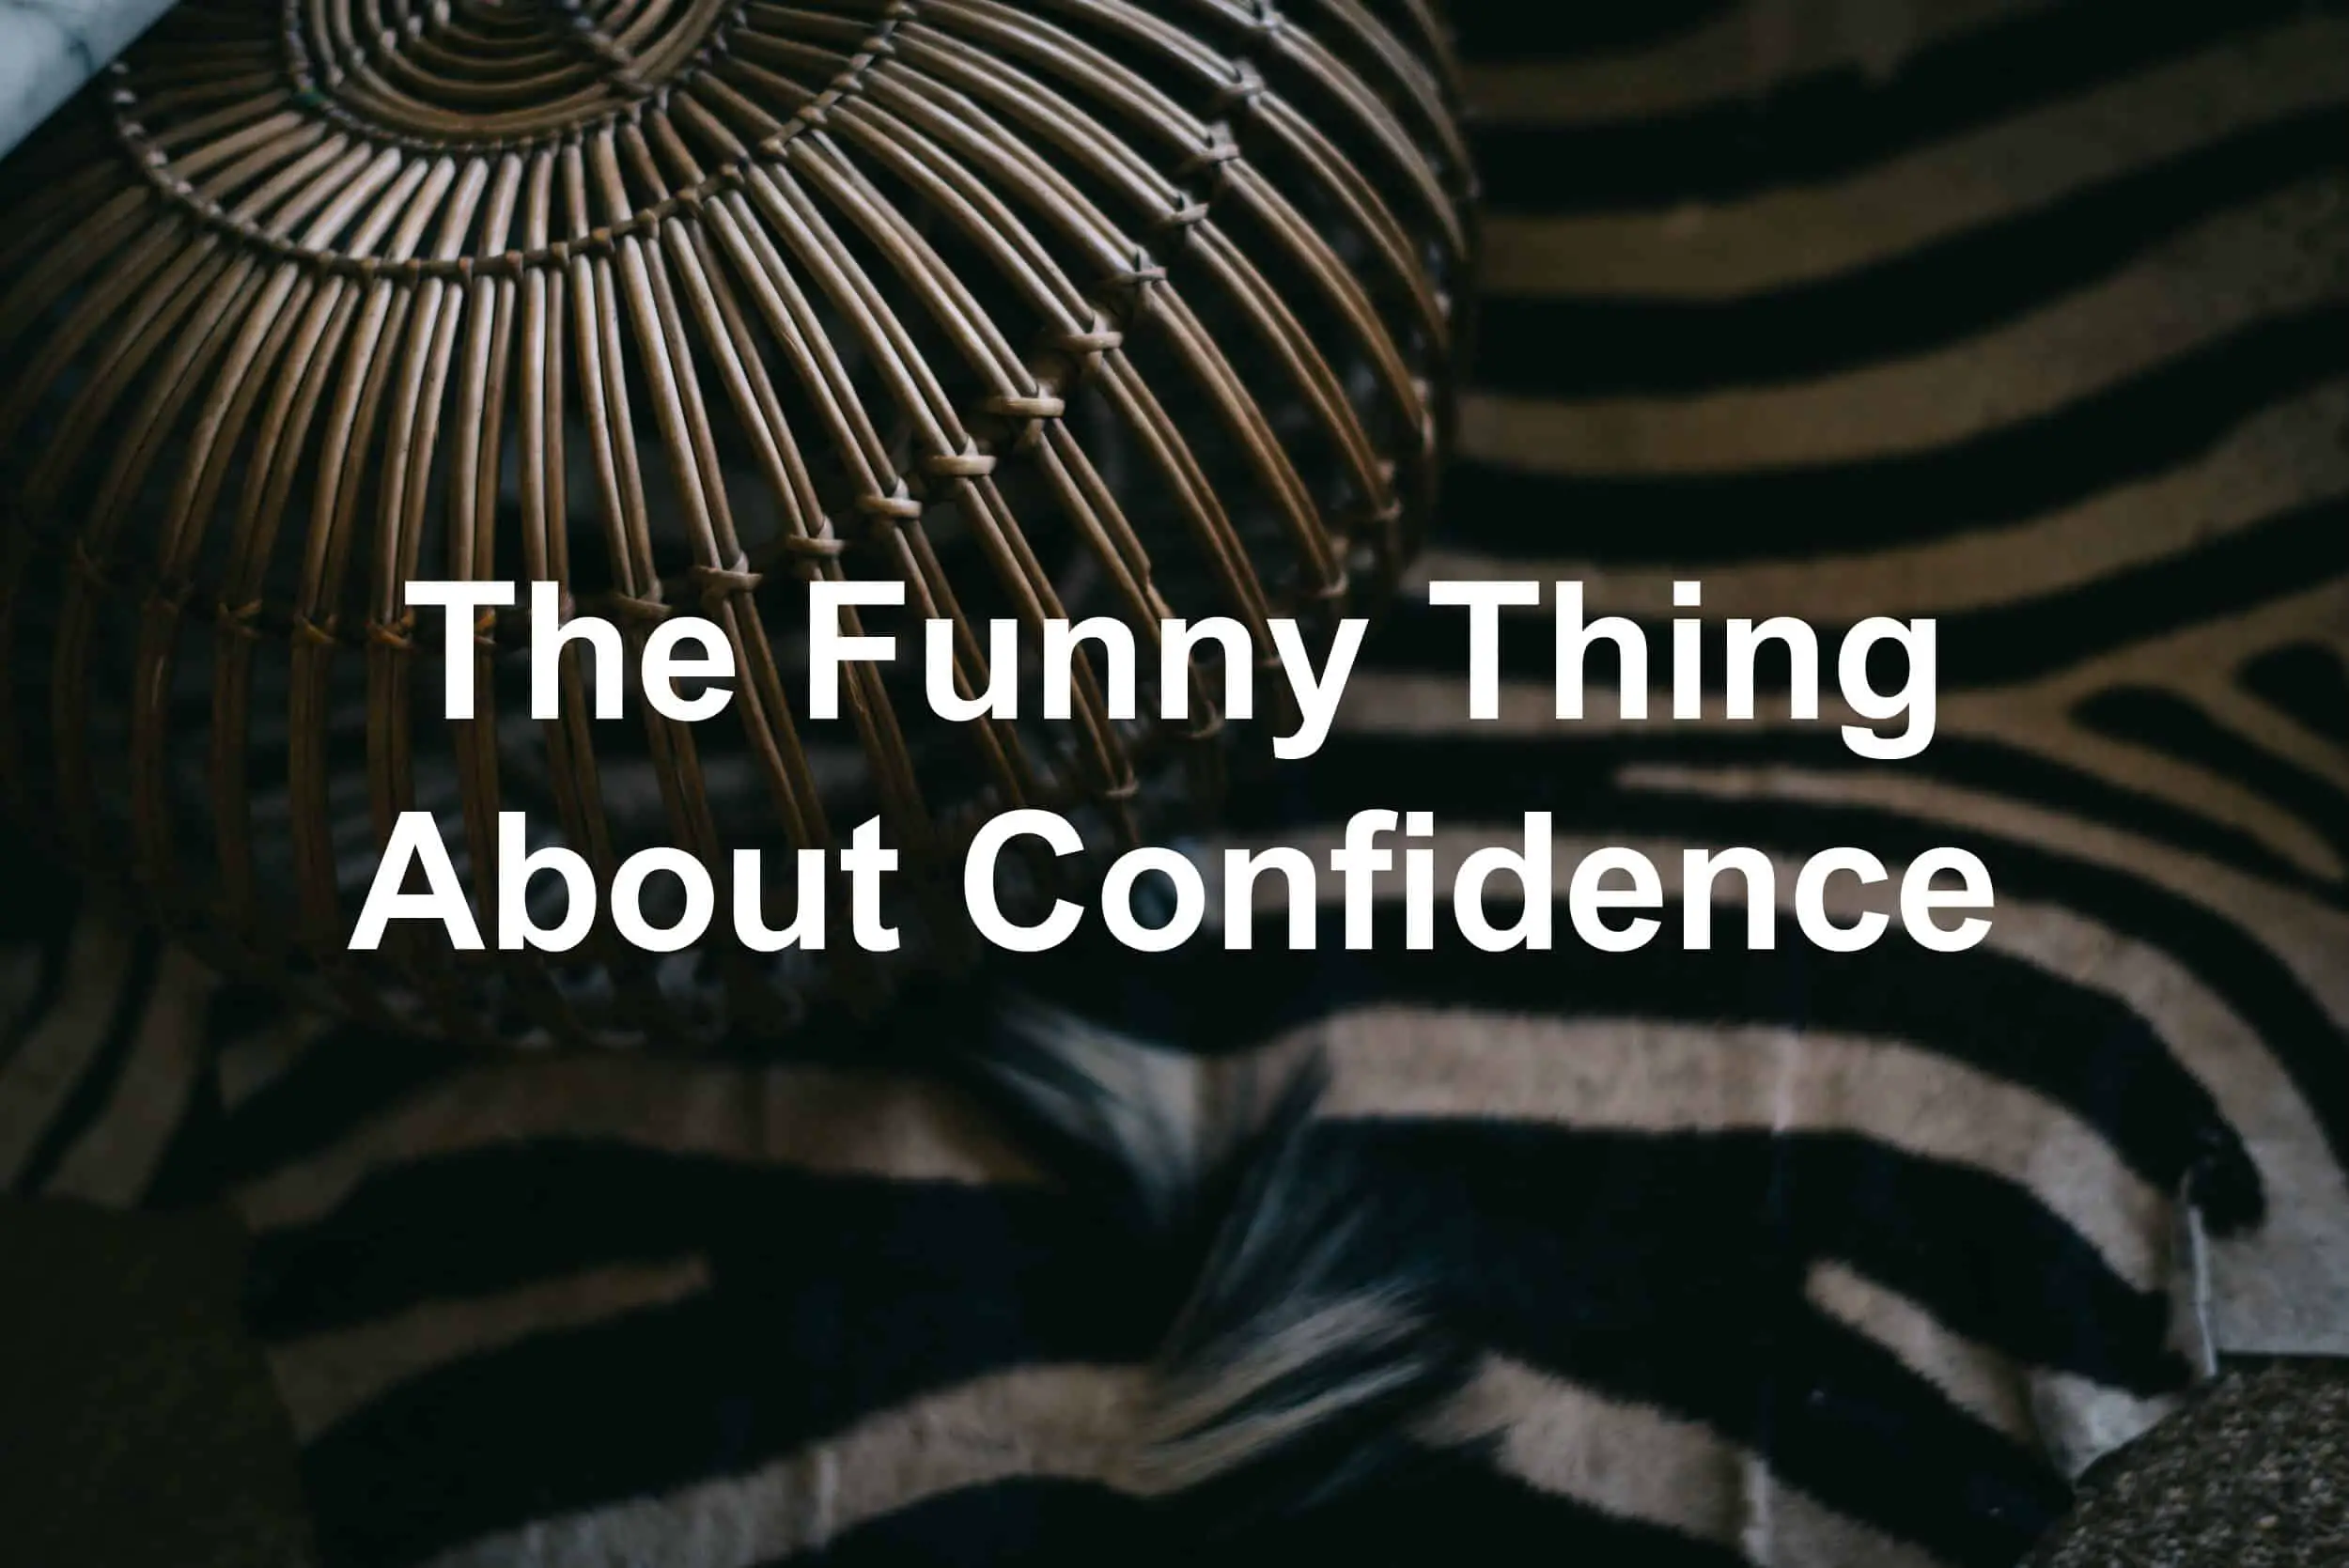 Confidence is a funny thing